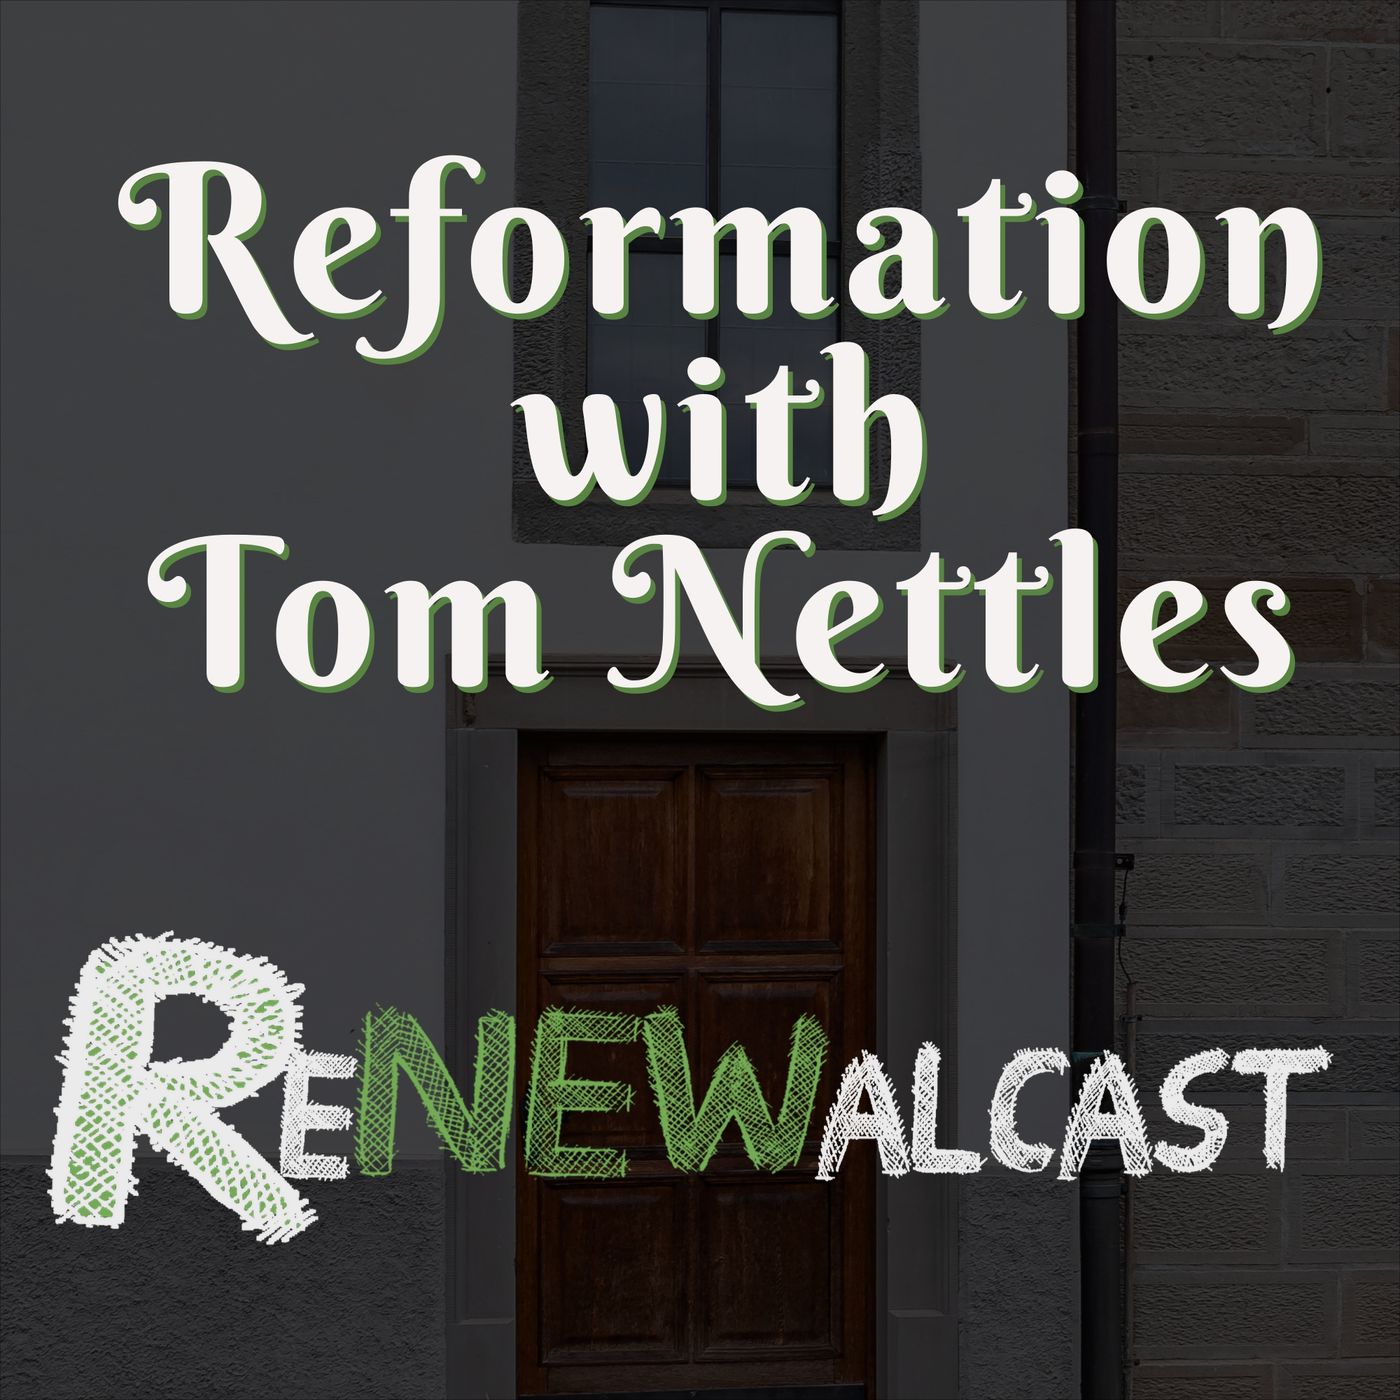 Reformation with Tom Nettles